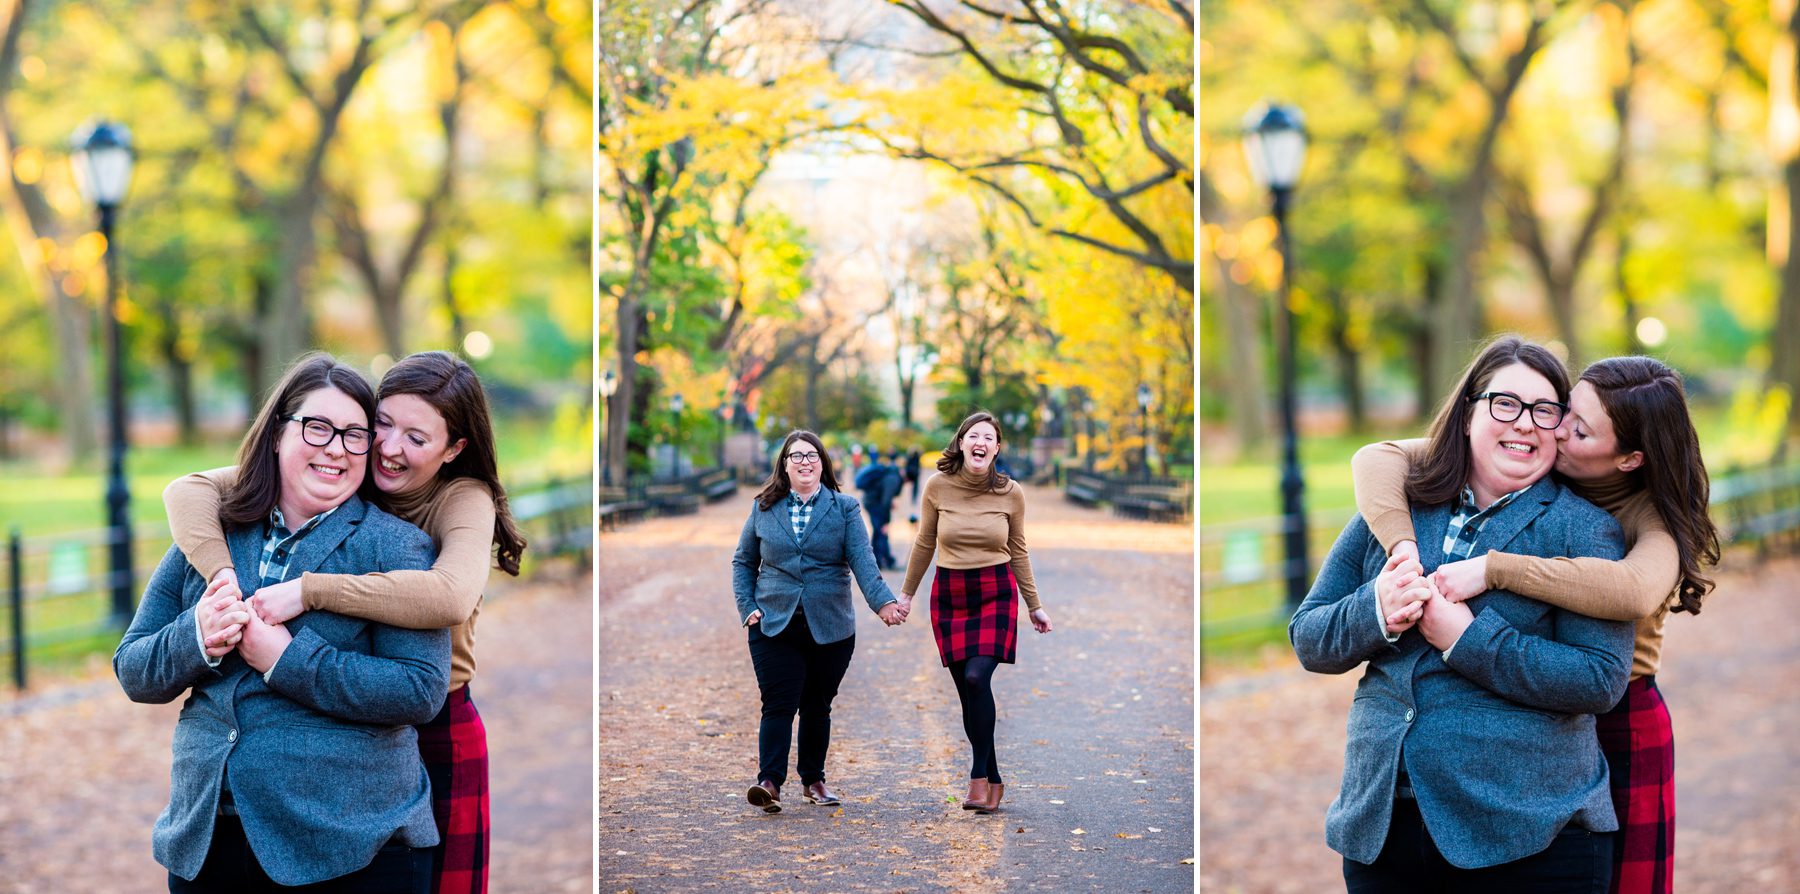 Where to Take Photos in Central Park 